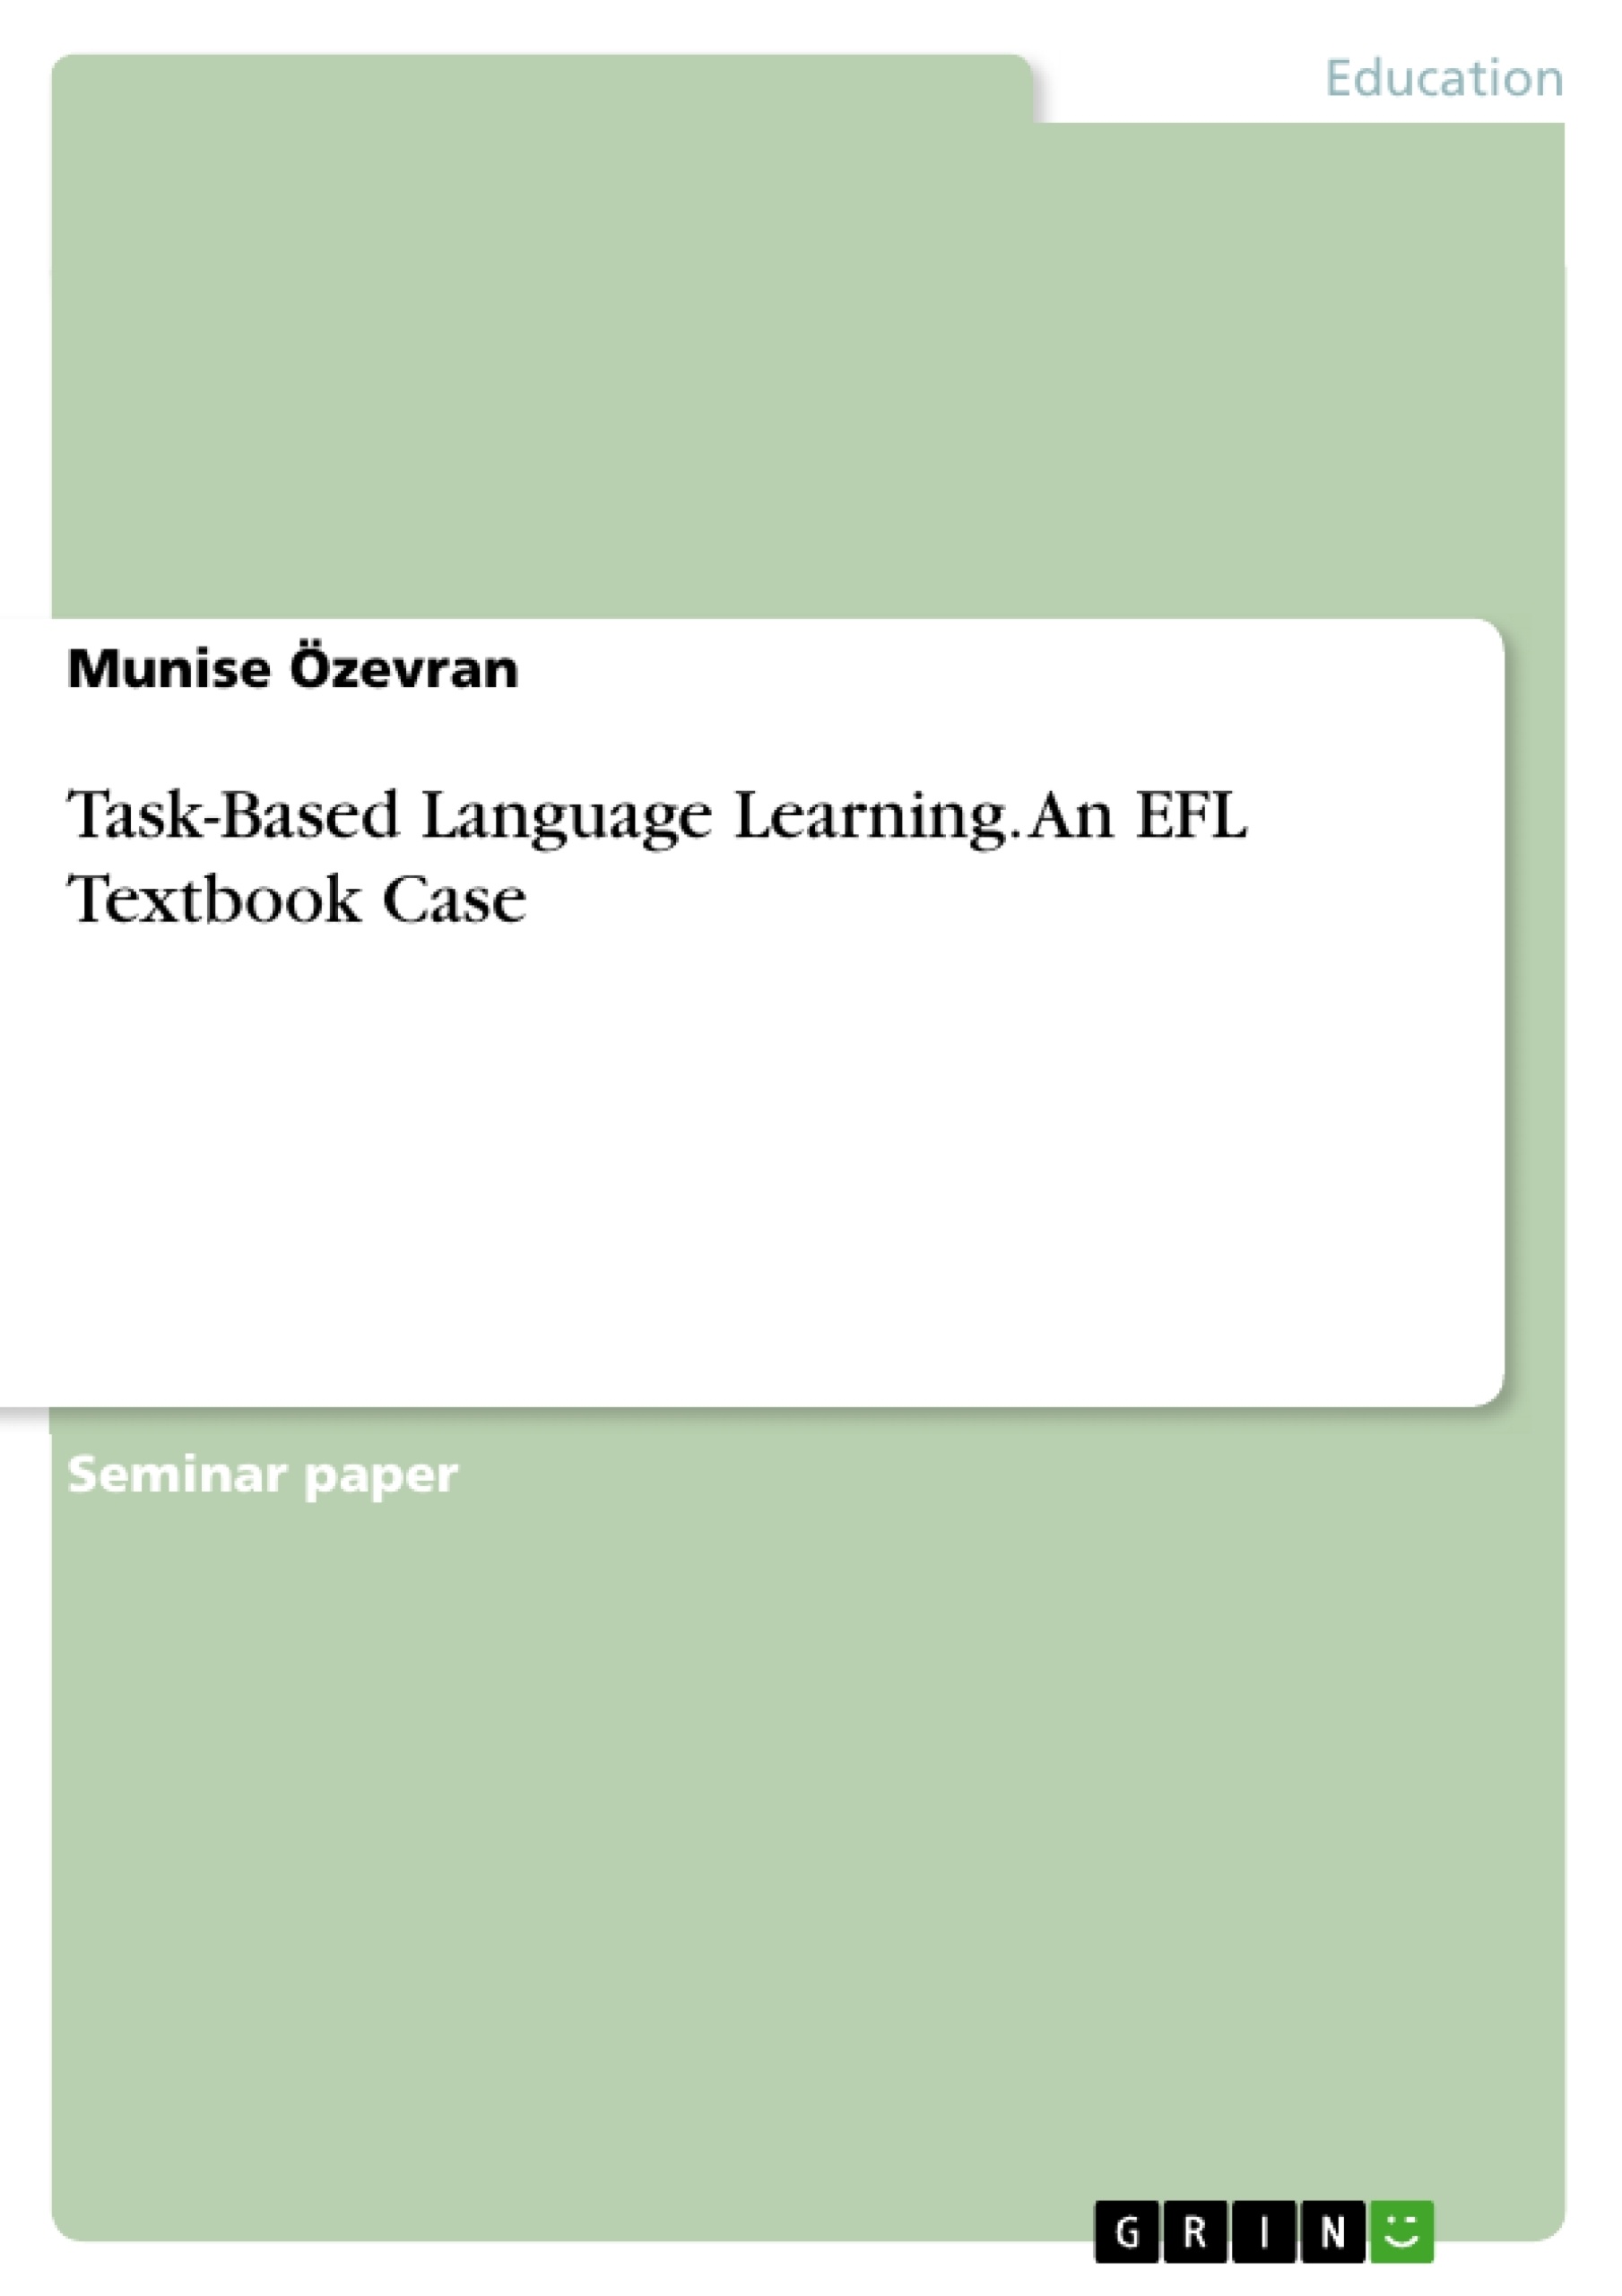 Title: Task-Based Language Learning. An EFL Textbook Case